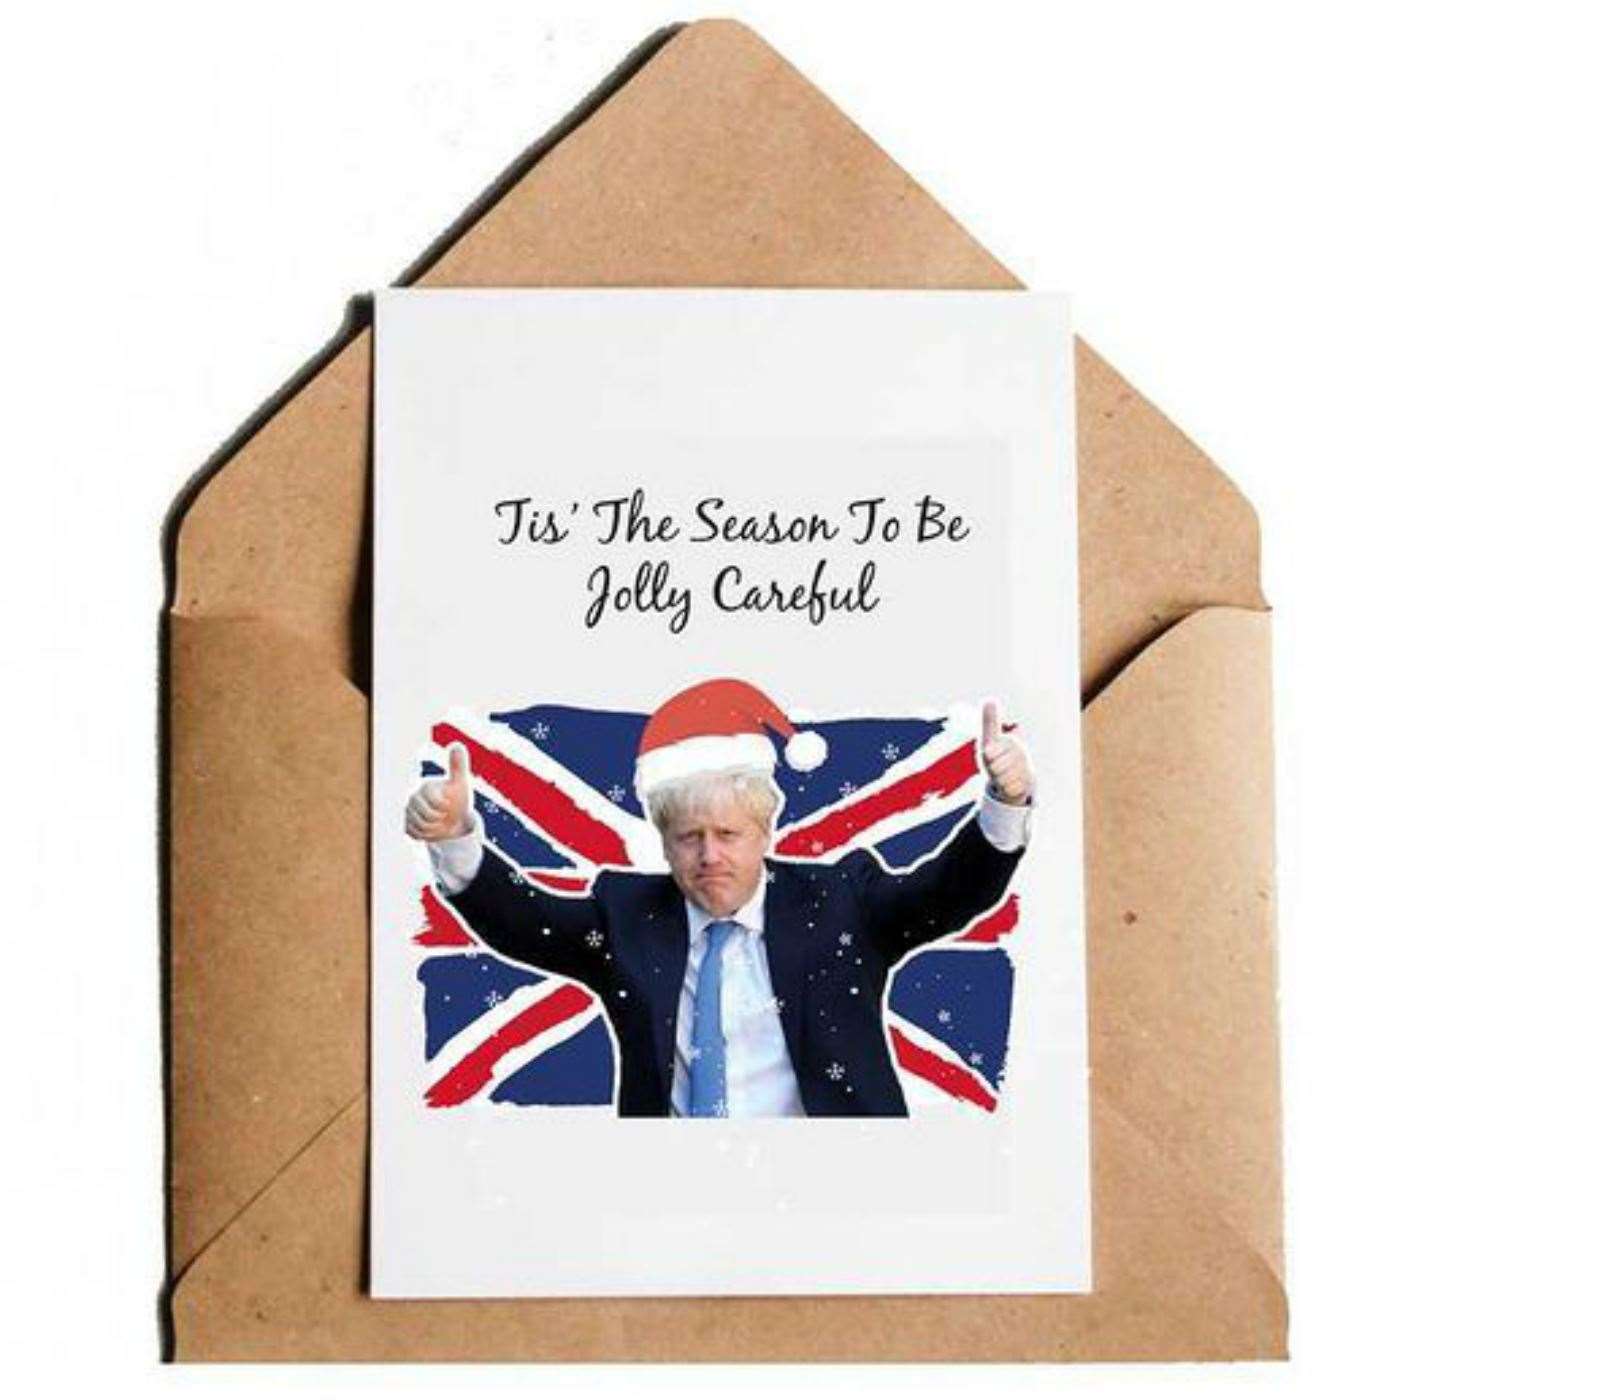 A Christmas card inspired by the Prime Minister’s ‘jolly careful’ speech, created and sold by small business CaliPrintsbyHollie (Hollie Robinson/PA)